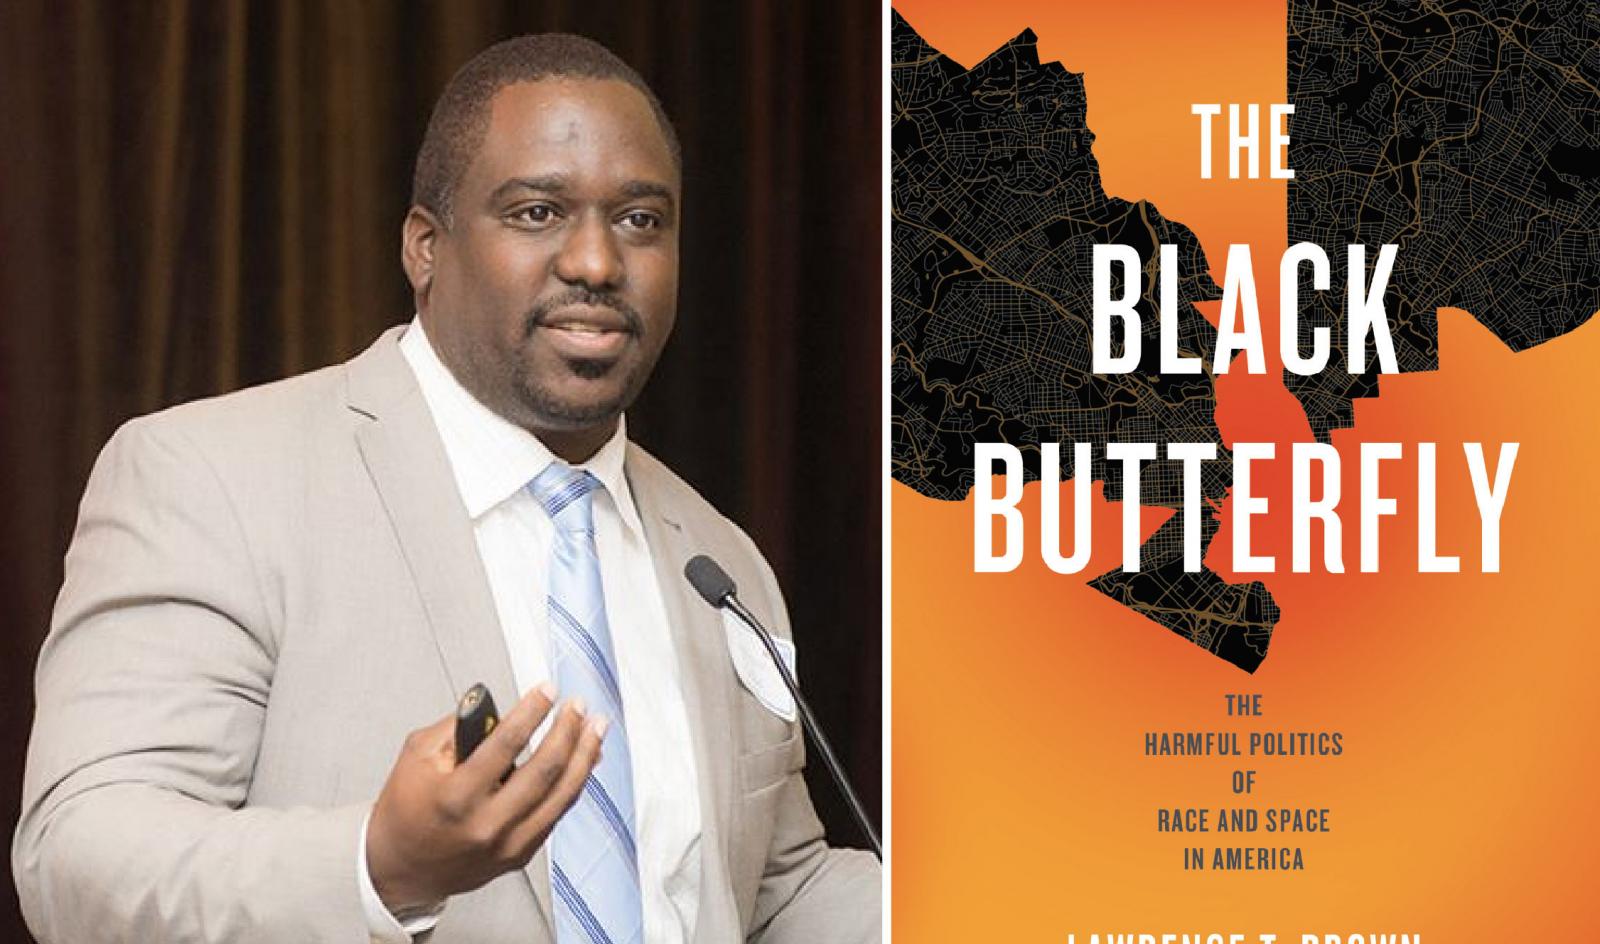 Dr. Lawrence Brown and his book, The Black Butterfly: the Harmful Politics of Race and Space in America.